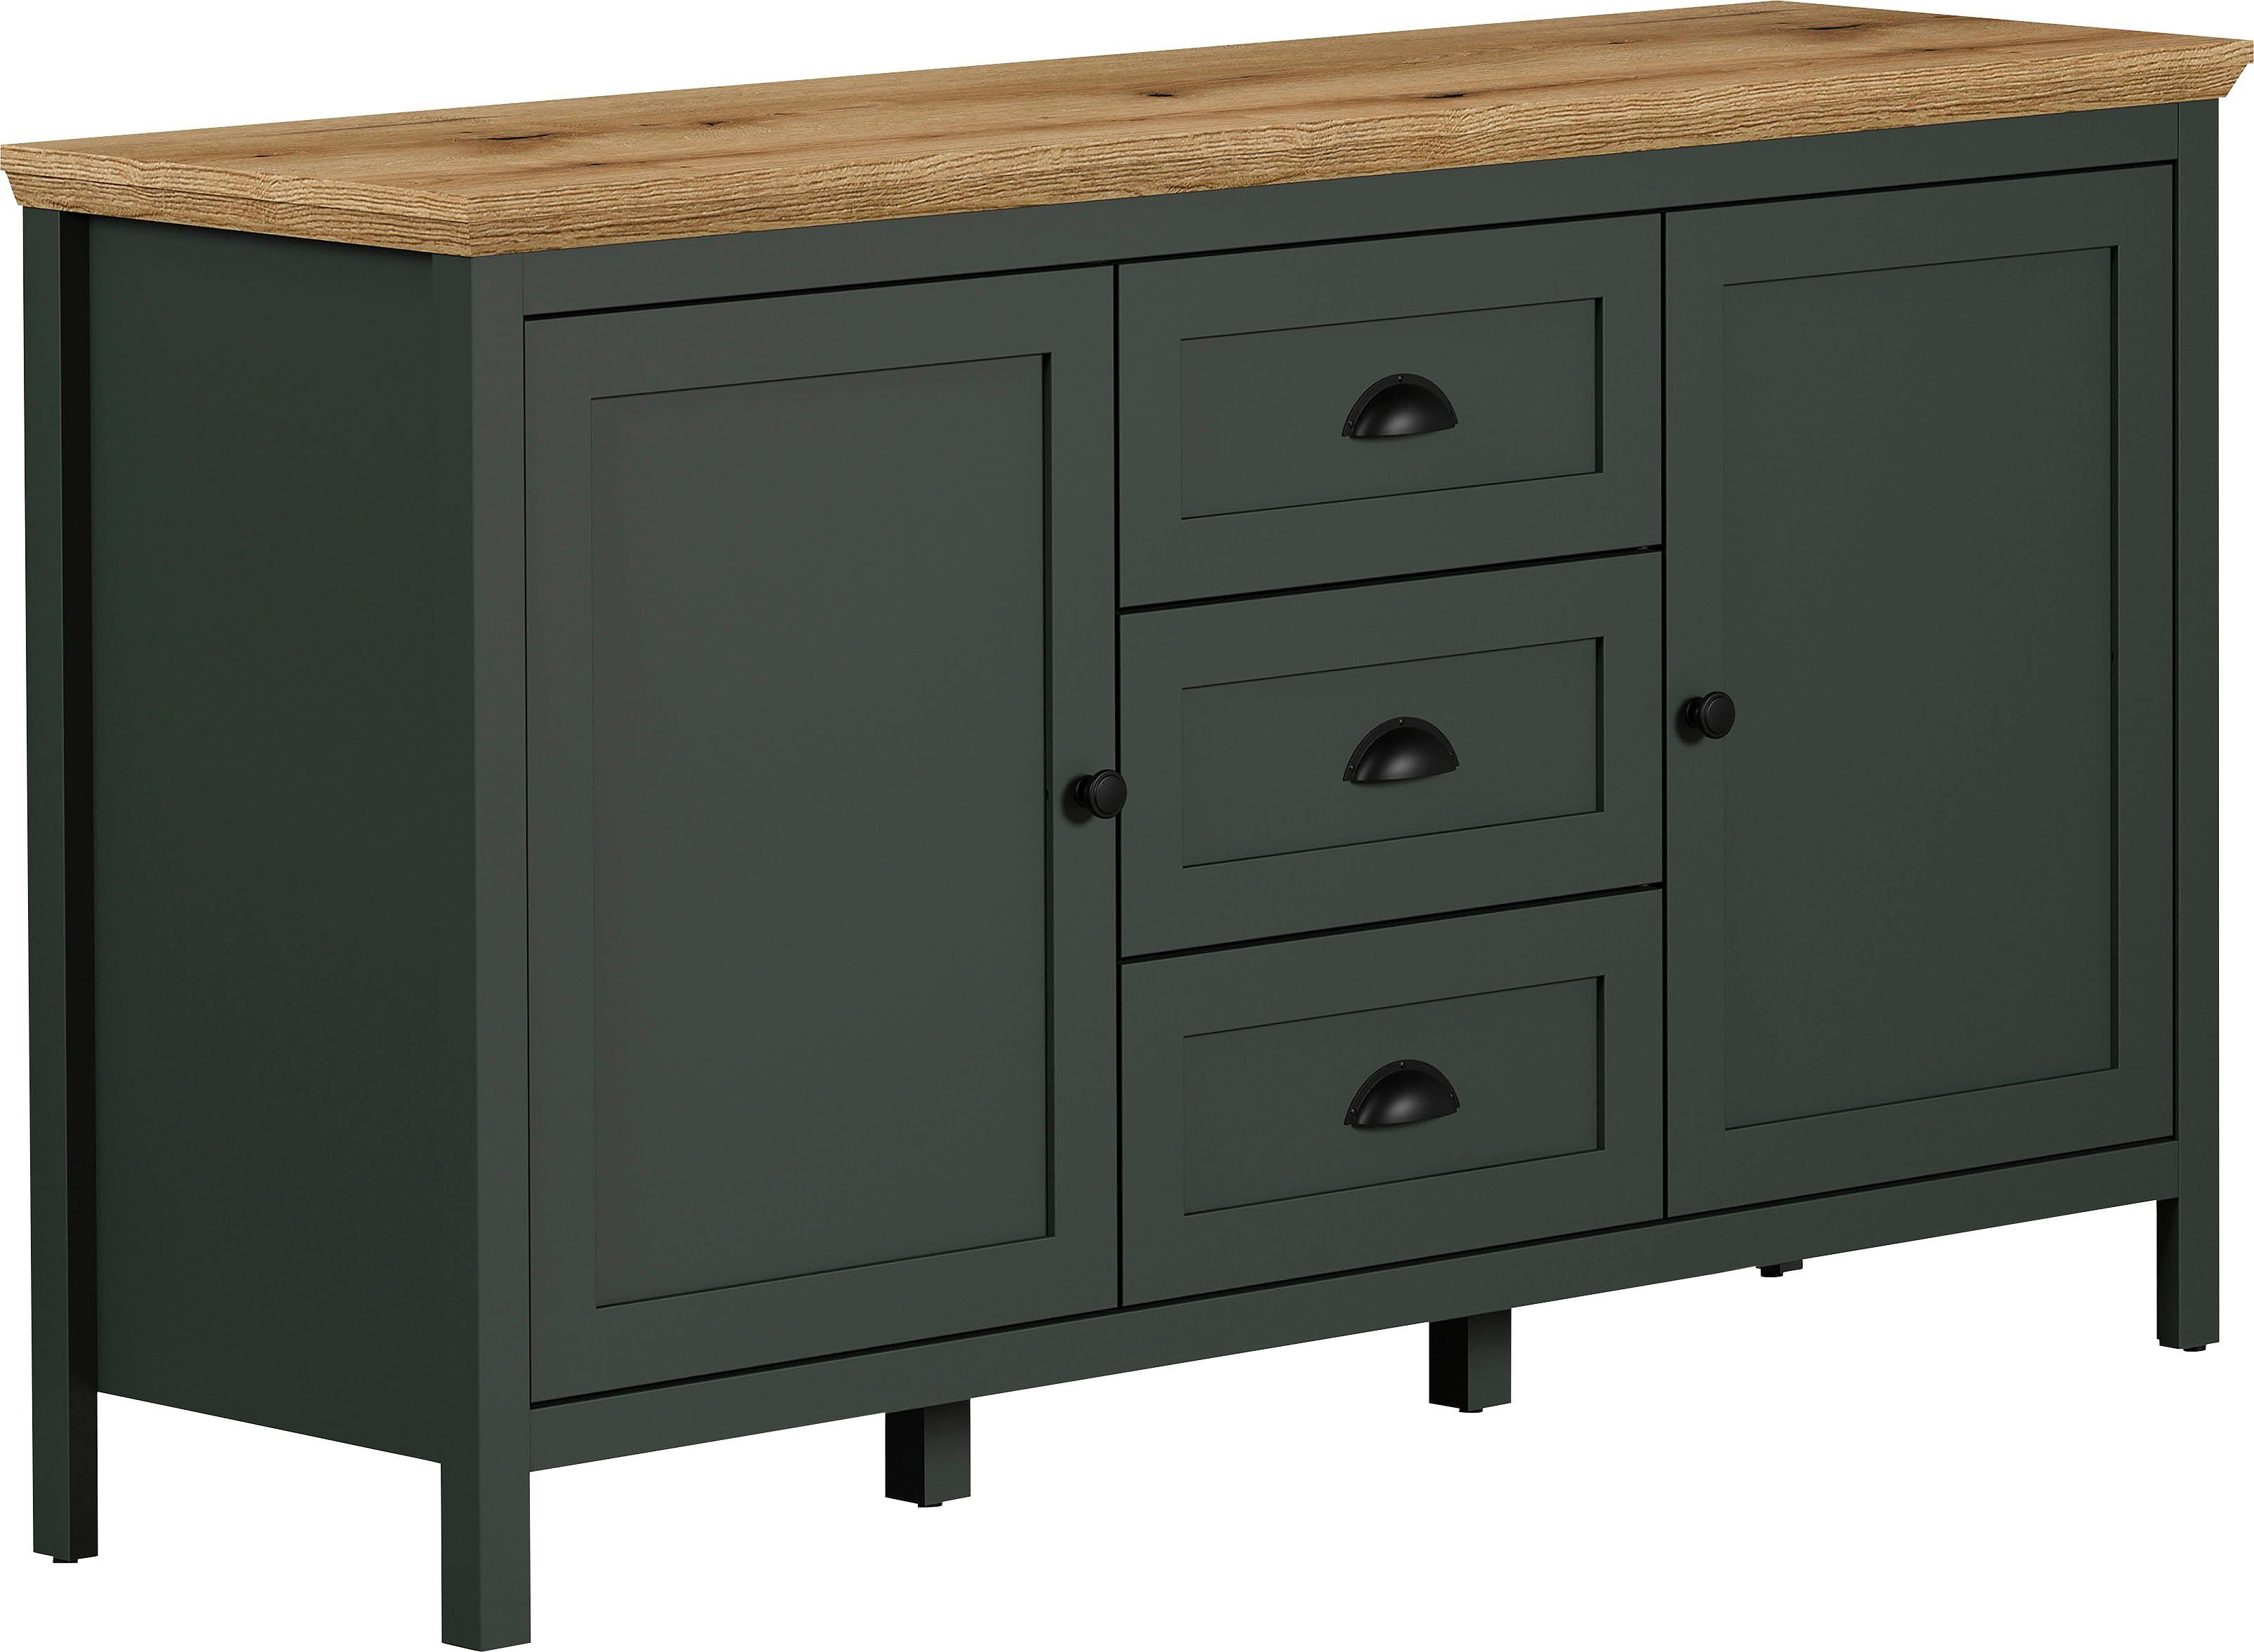 Home Vienna Sideboard affaire Sideboard